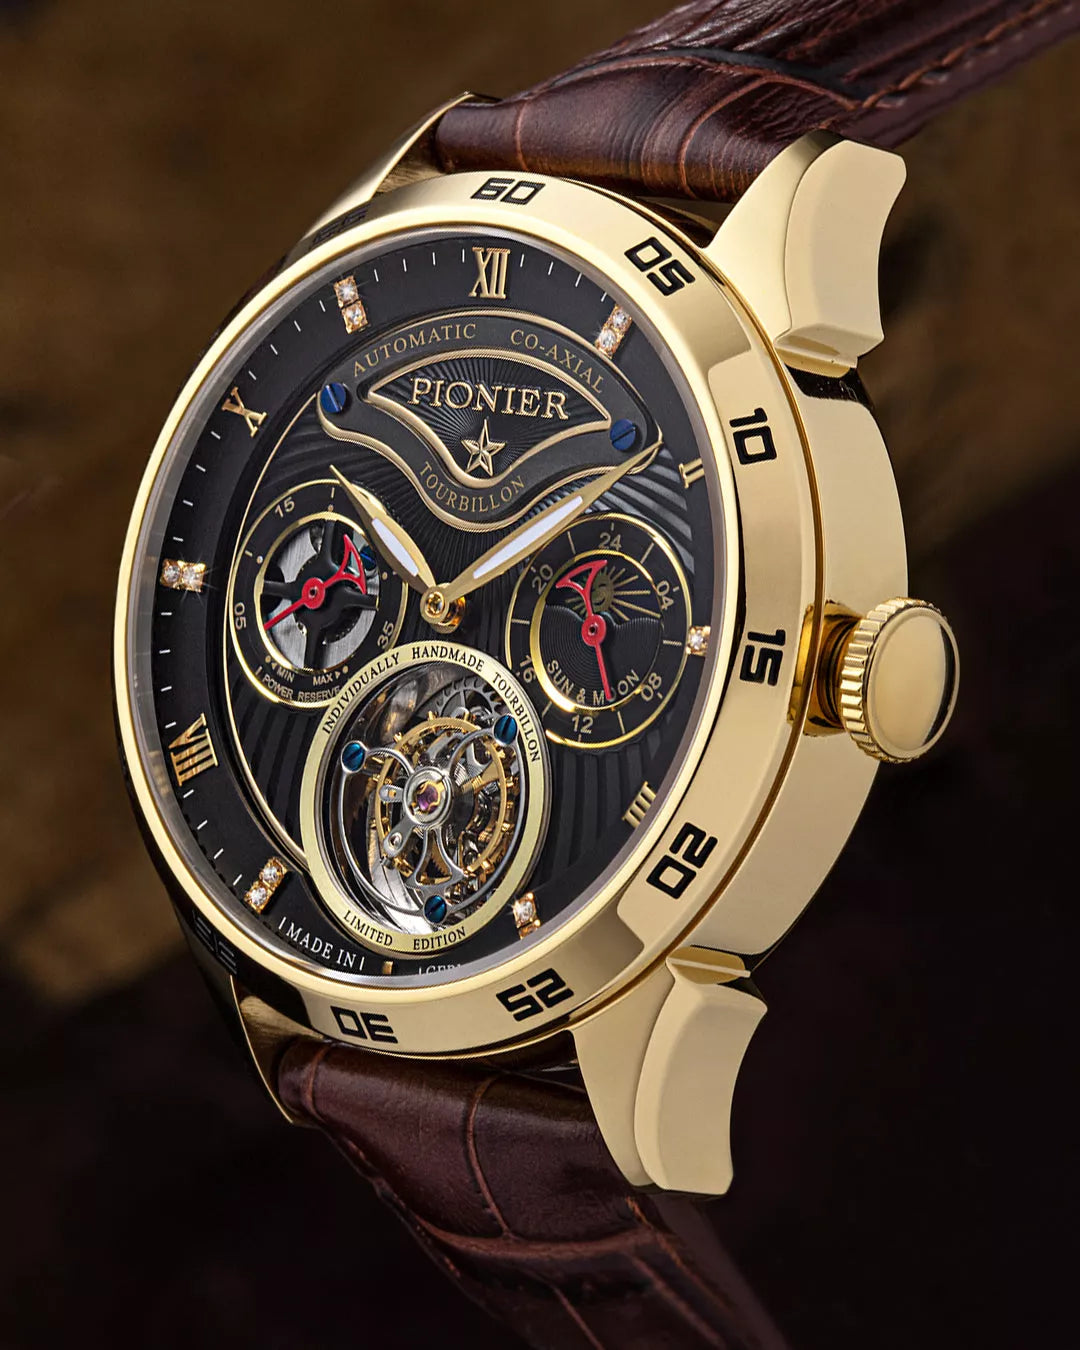 What is a tourbillon watch and why are they so expensive?